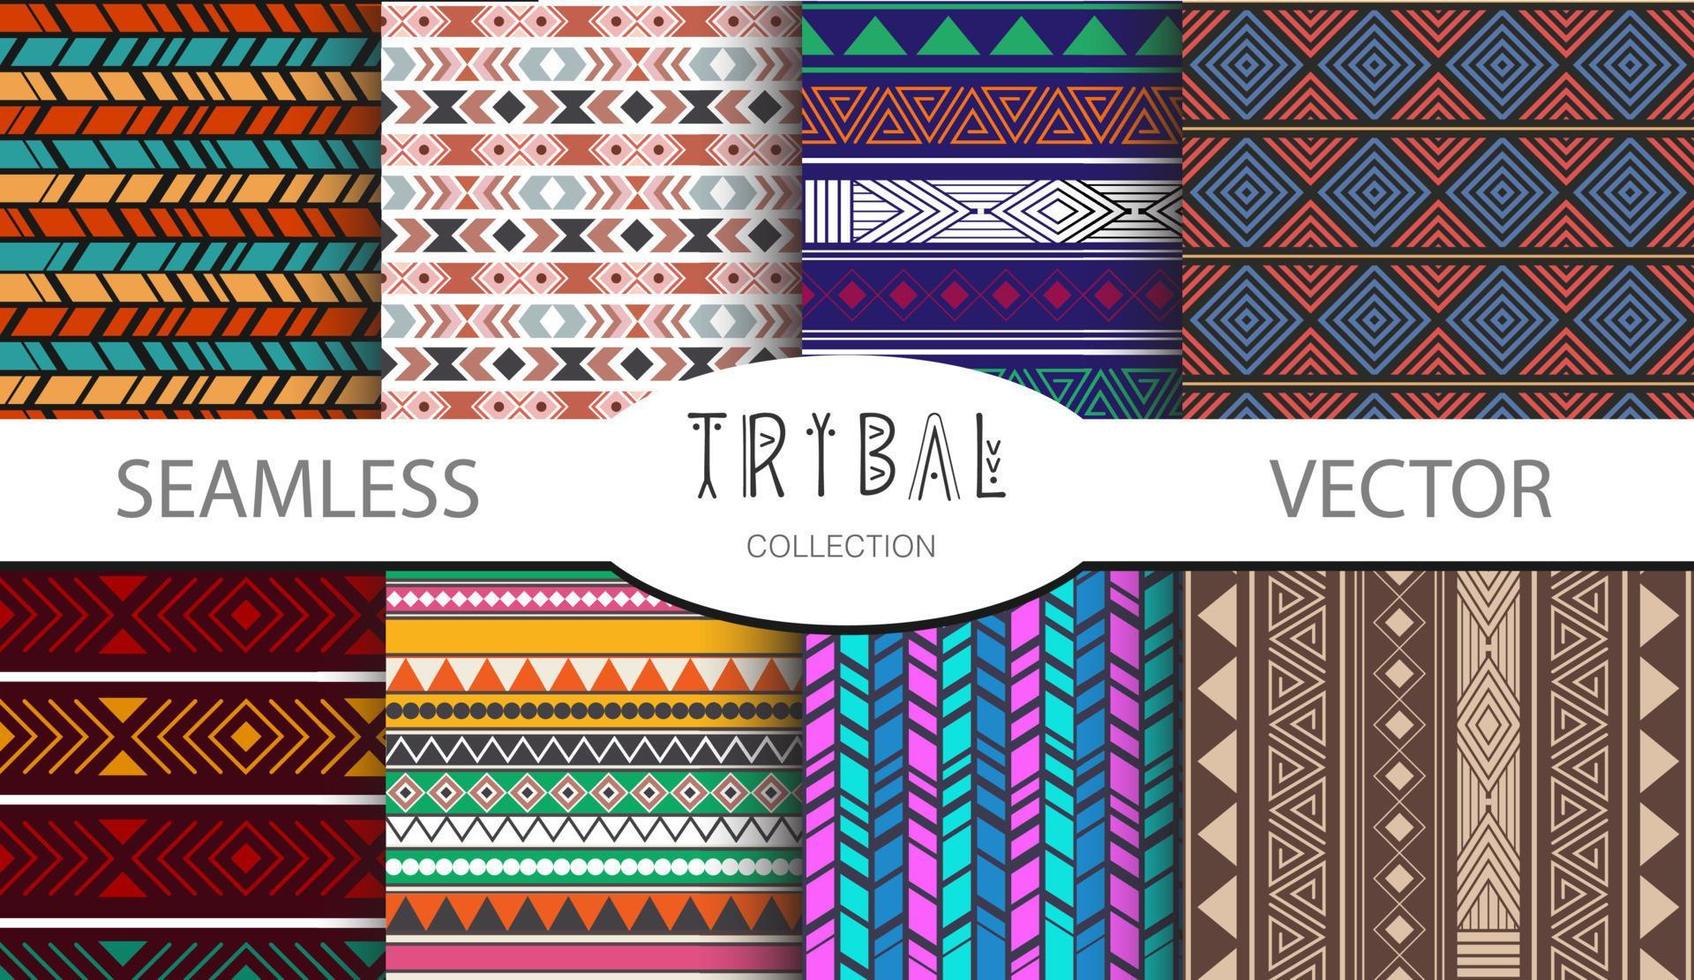 Collection of Tribal Native Indigenous. Seamless Patterns. Ethnic aesthetic and ornaments inspired by Tradition of Africa. Black culture designs, folk artworks and native style graphics. vector